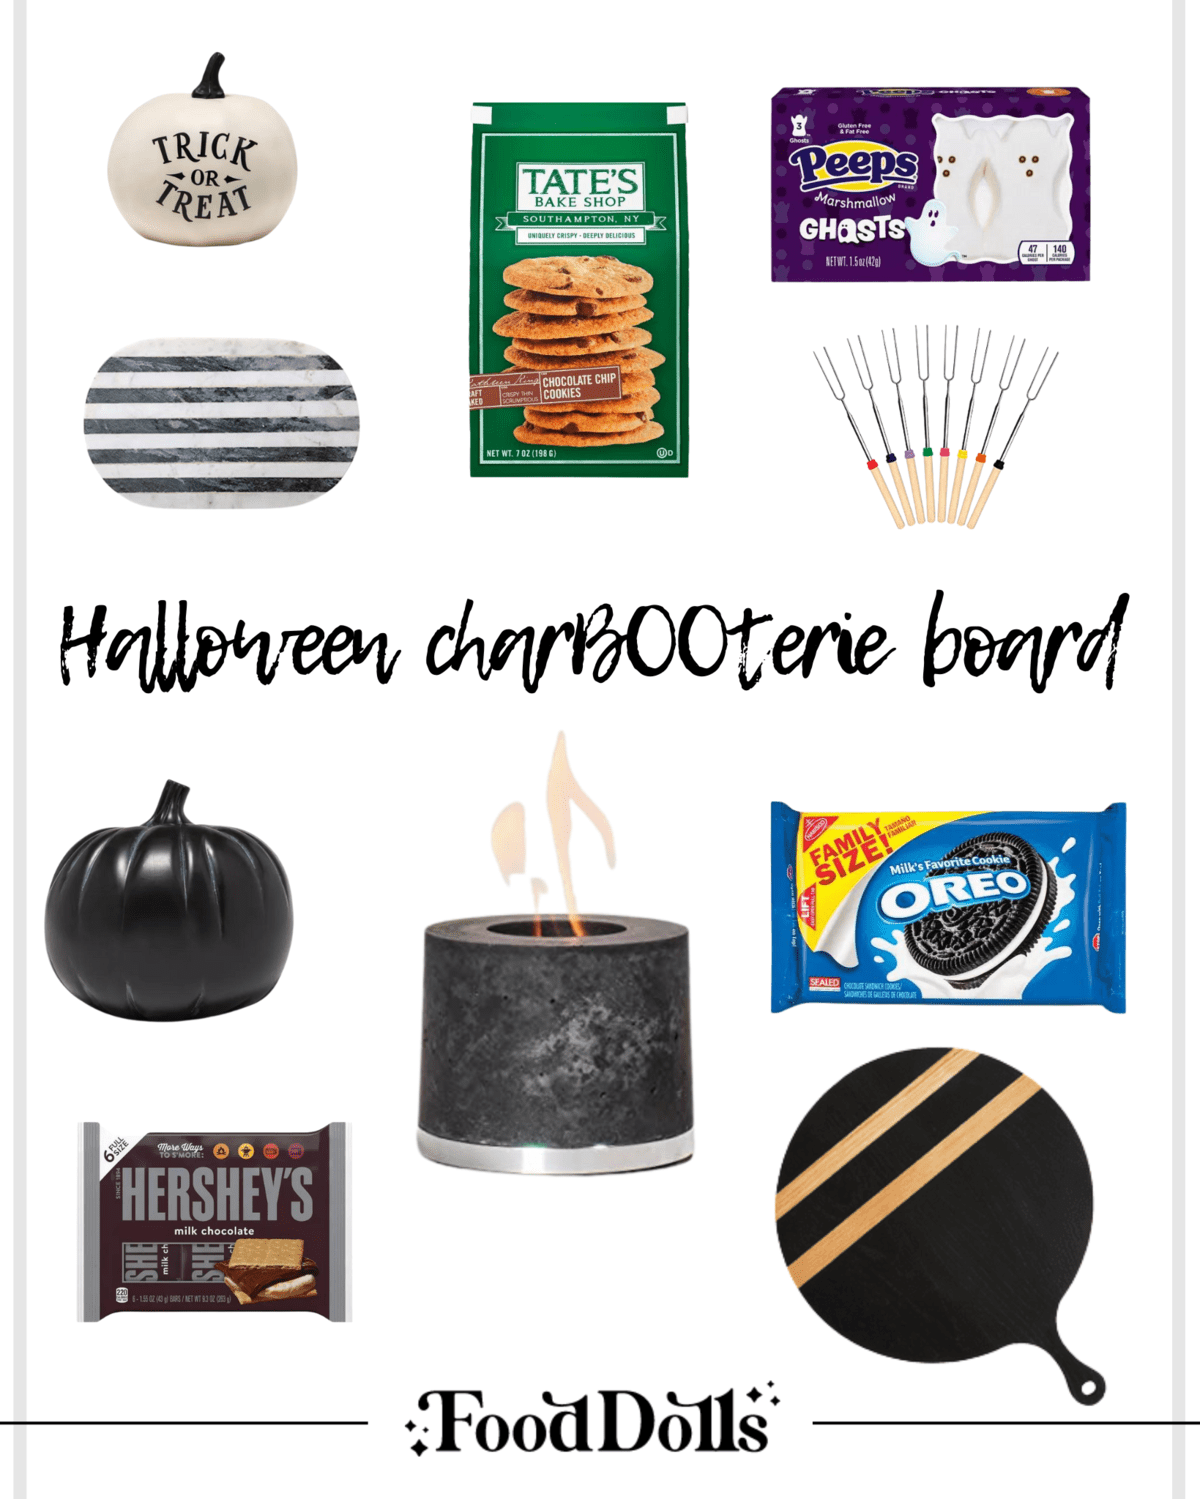 Pinerest iamge for halloween smore board